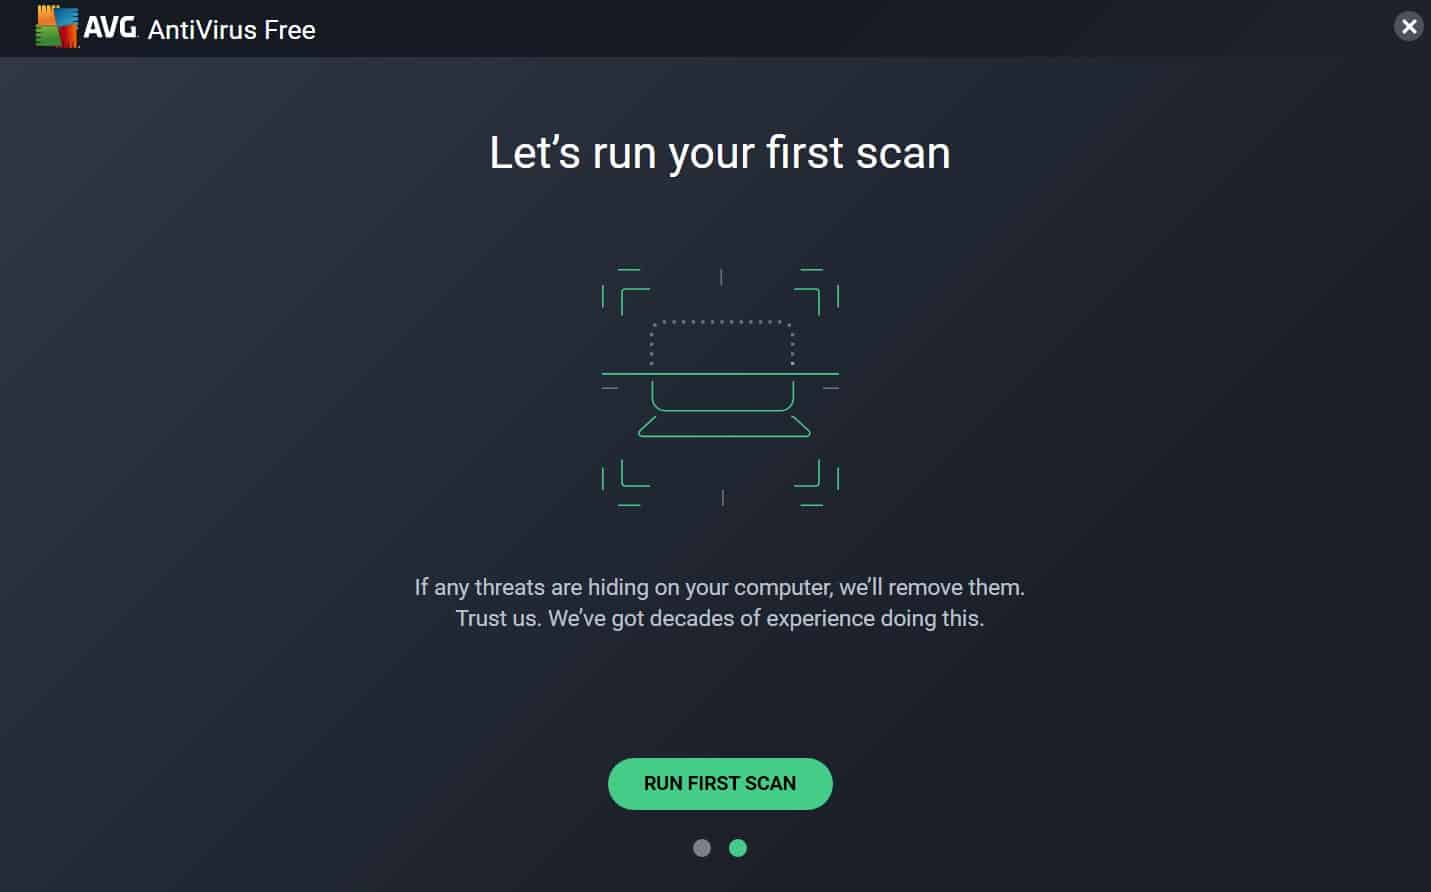 Install and run a reputable antivirus or anti-malware software.
Perform a full system scan to detect and remove any malware.